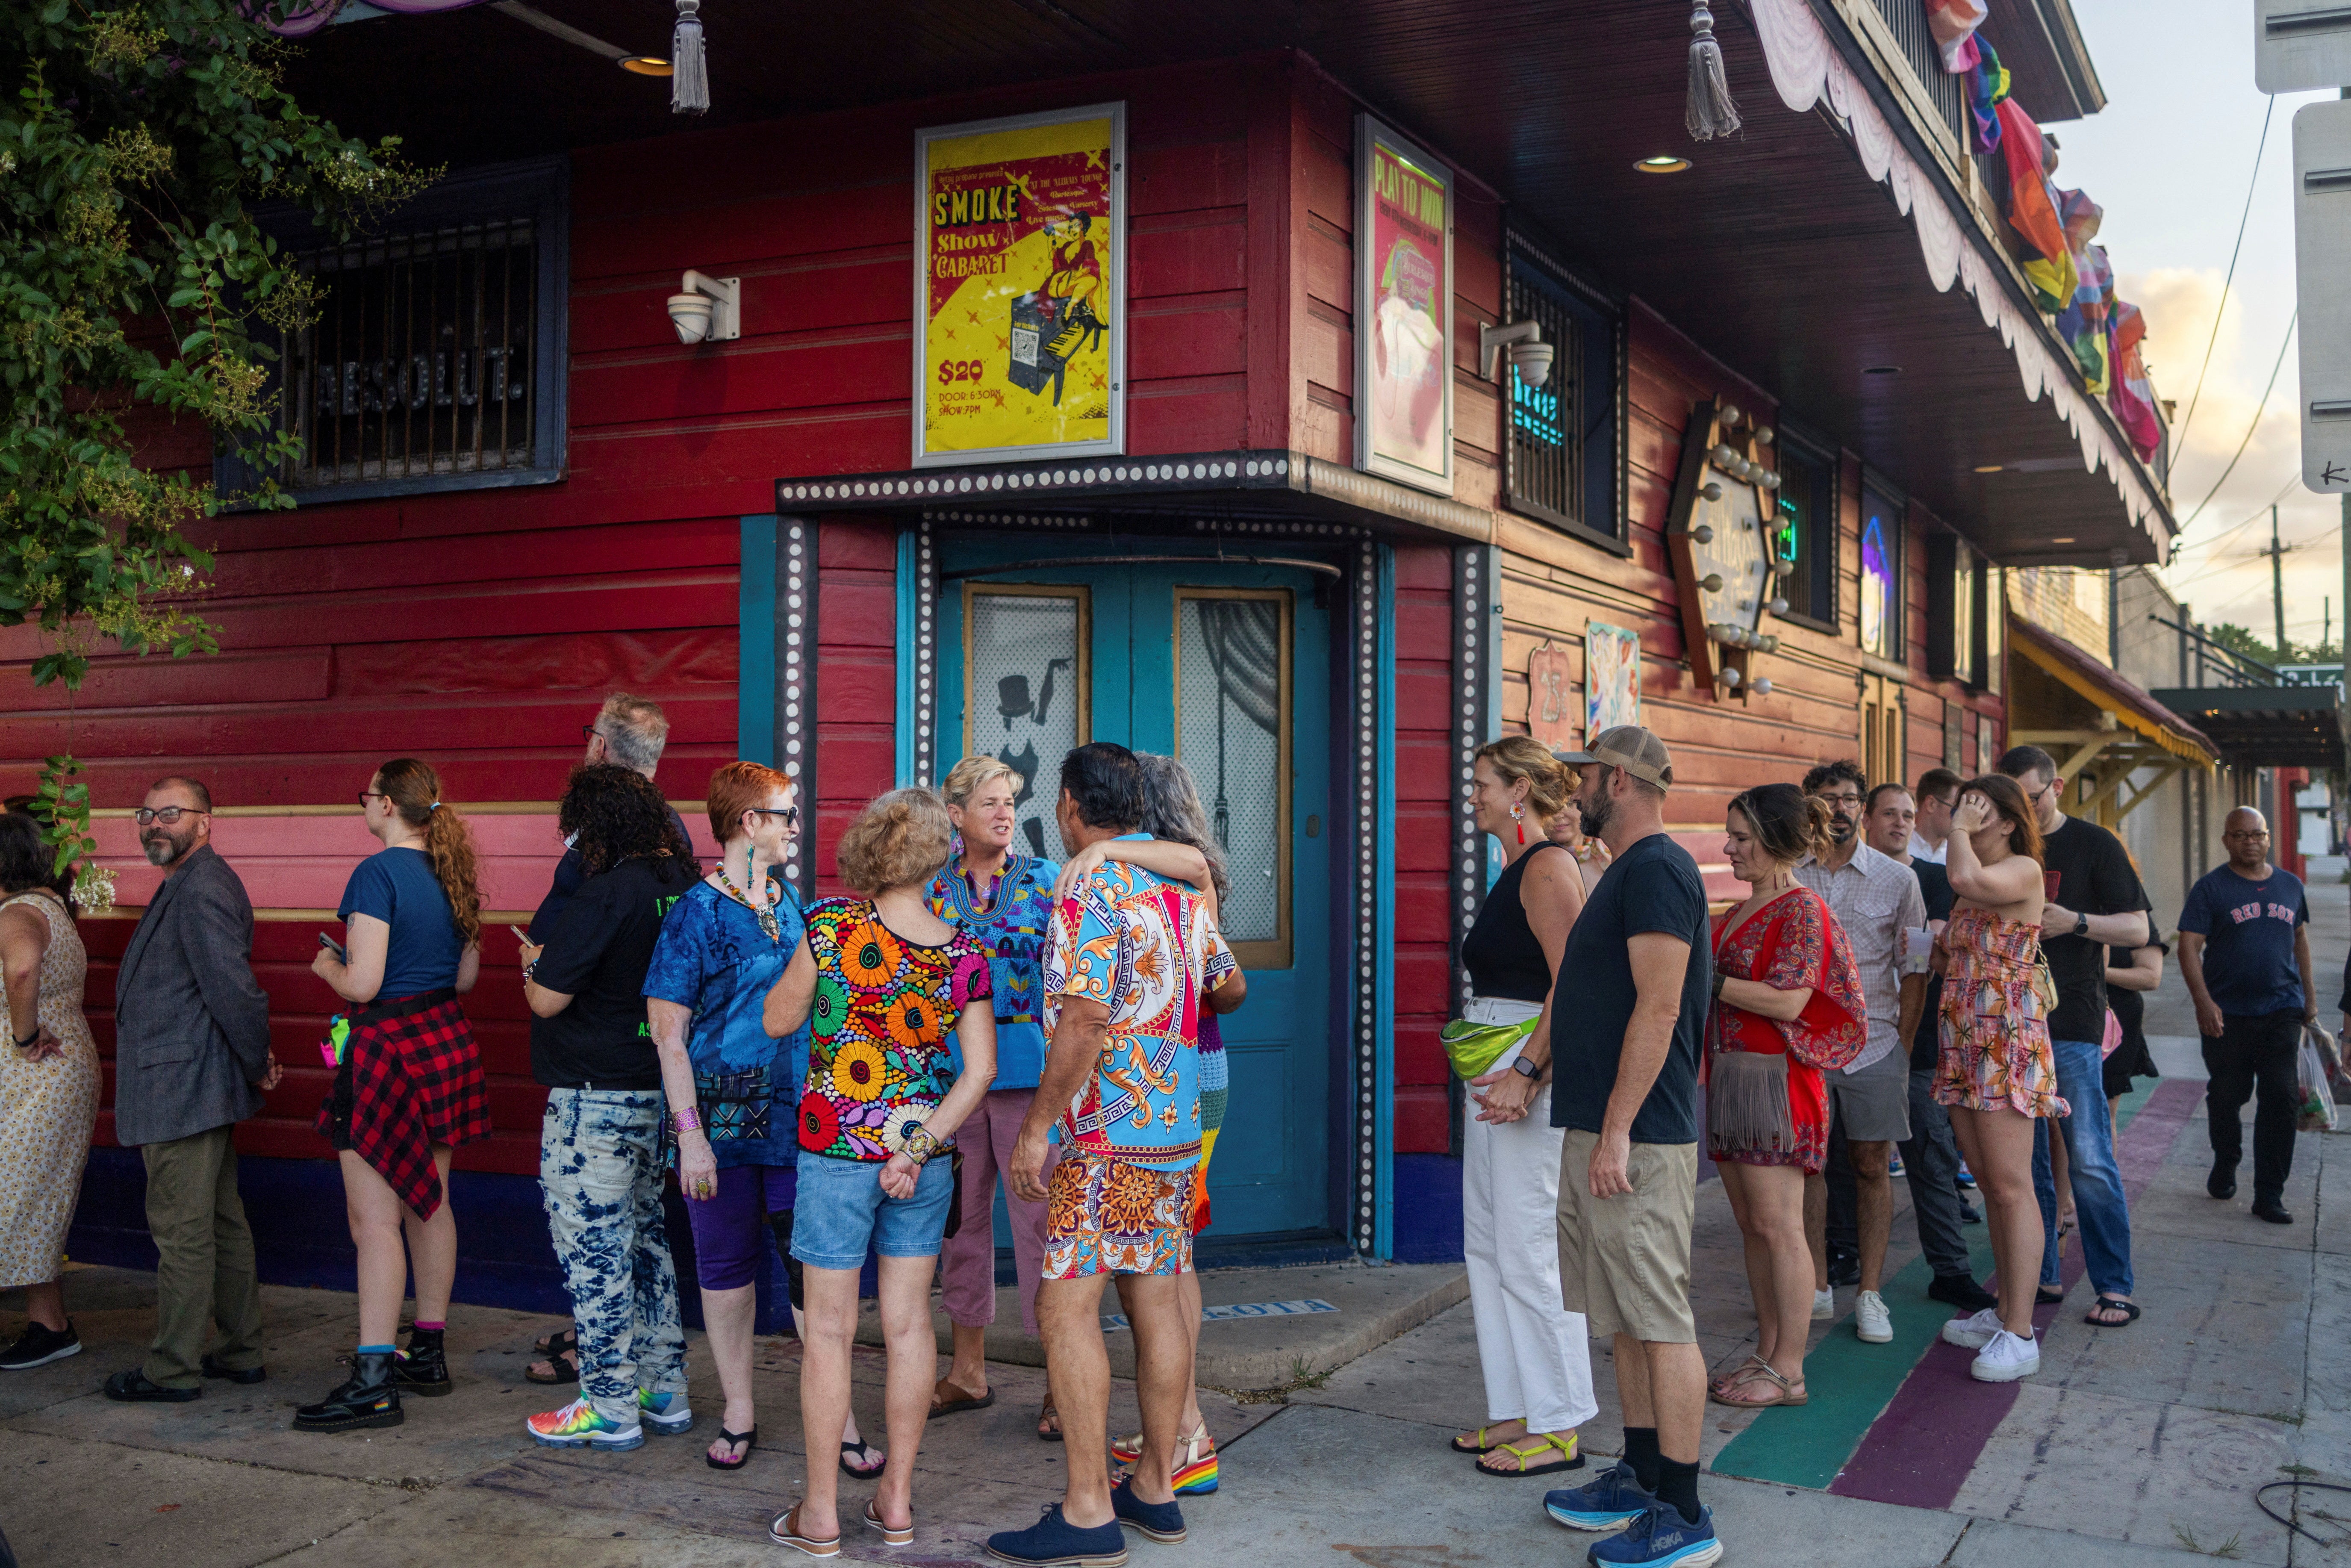 A line of people wait outside the venue for Stormy Daniels’ comedy show in New Orleans, Louisiana on June 19, 2024. Daniels played a star role in Donald Trump’s hush money trial and is now pivoting to stand-up comedy